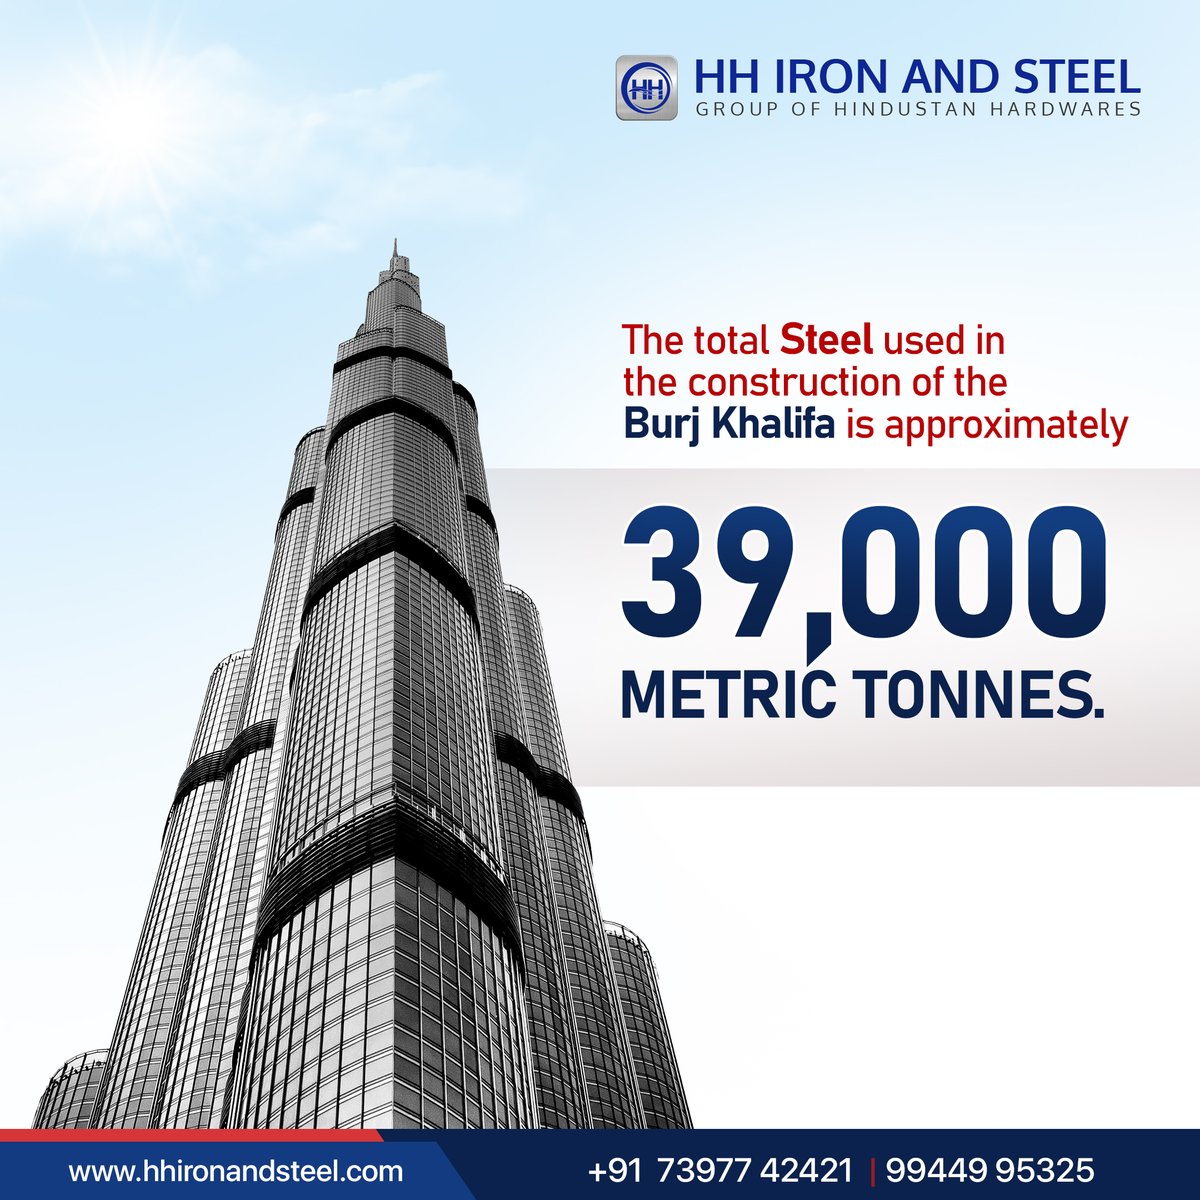 Found interesting? Hope so, Yes! Let us know much more interesting steel facts ahead.

#Fact #SteelFacts #Steel #SteelBuilding #SteelIndustry #SteelConstruction #BurjKhalifa #HHIS #HHIronandSteel